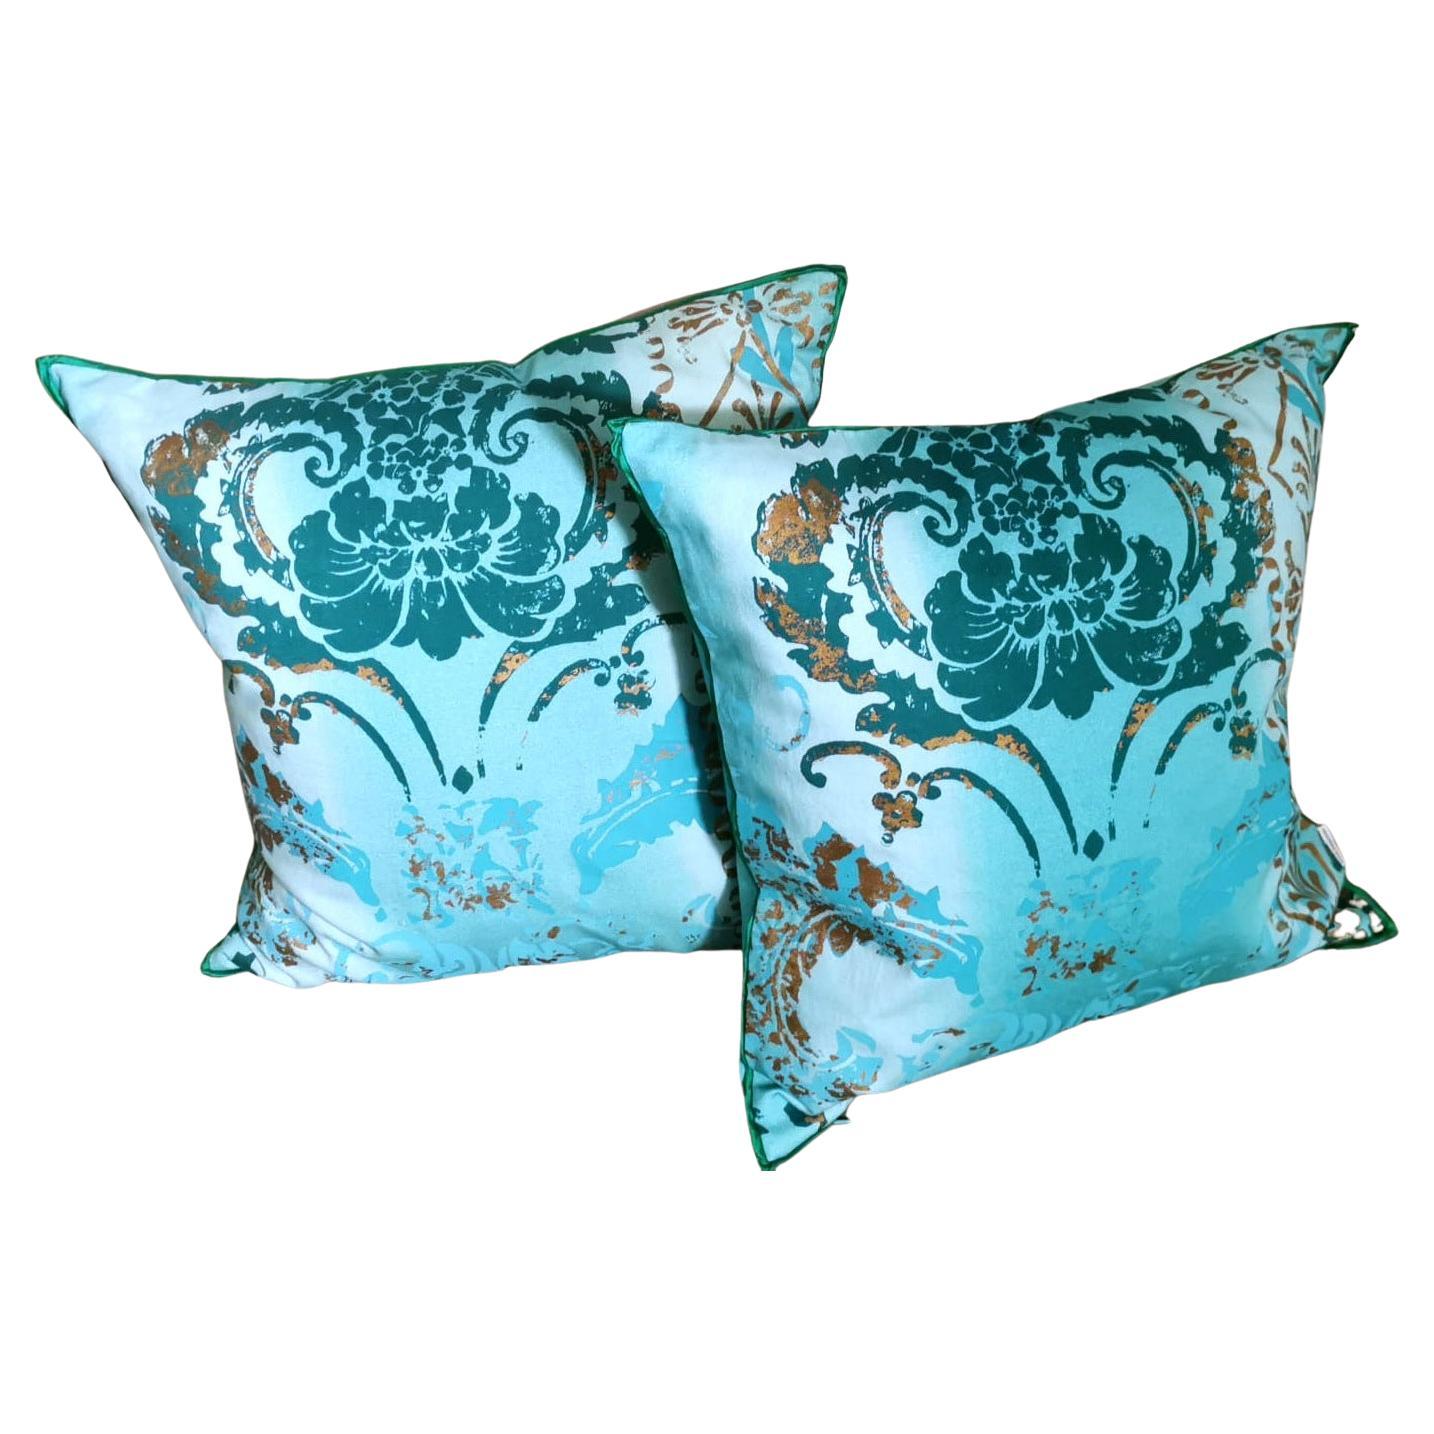 Guild Designer Pair of Printed Cotton Pillows with Feather Interior For Sale